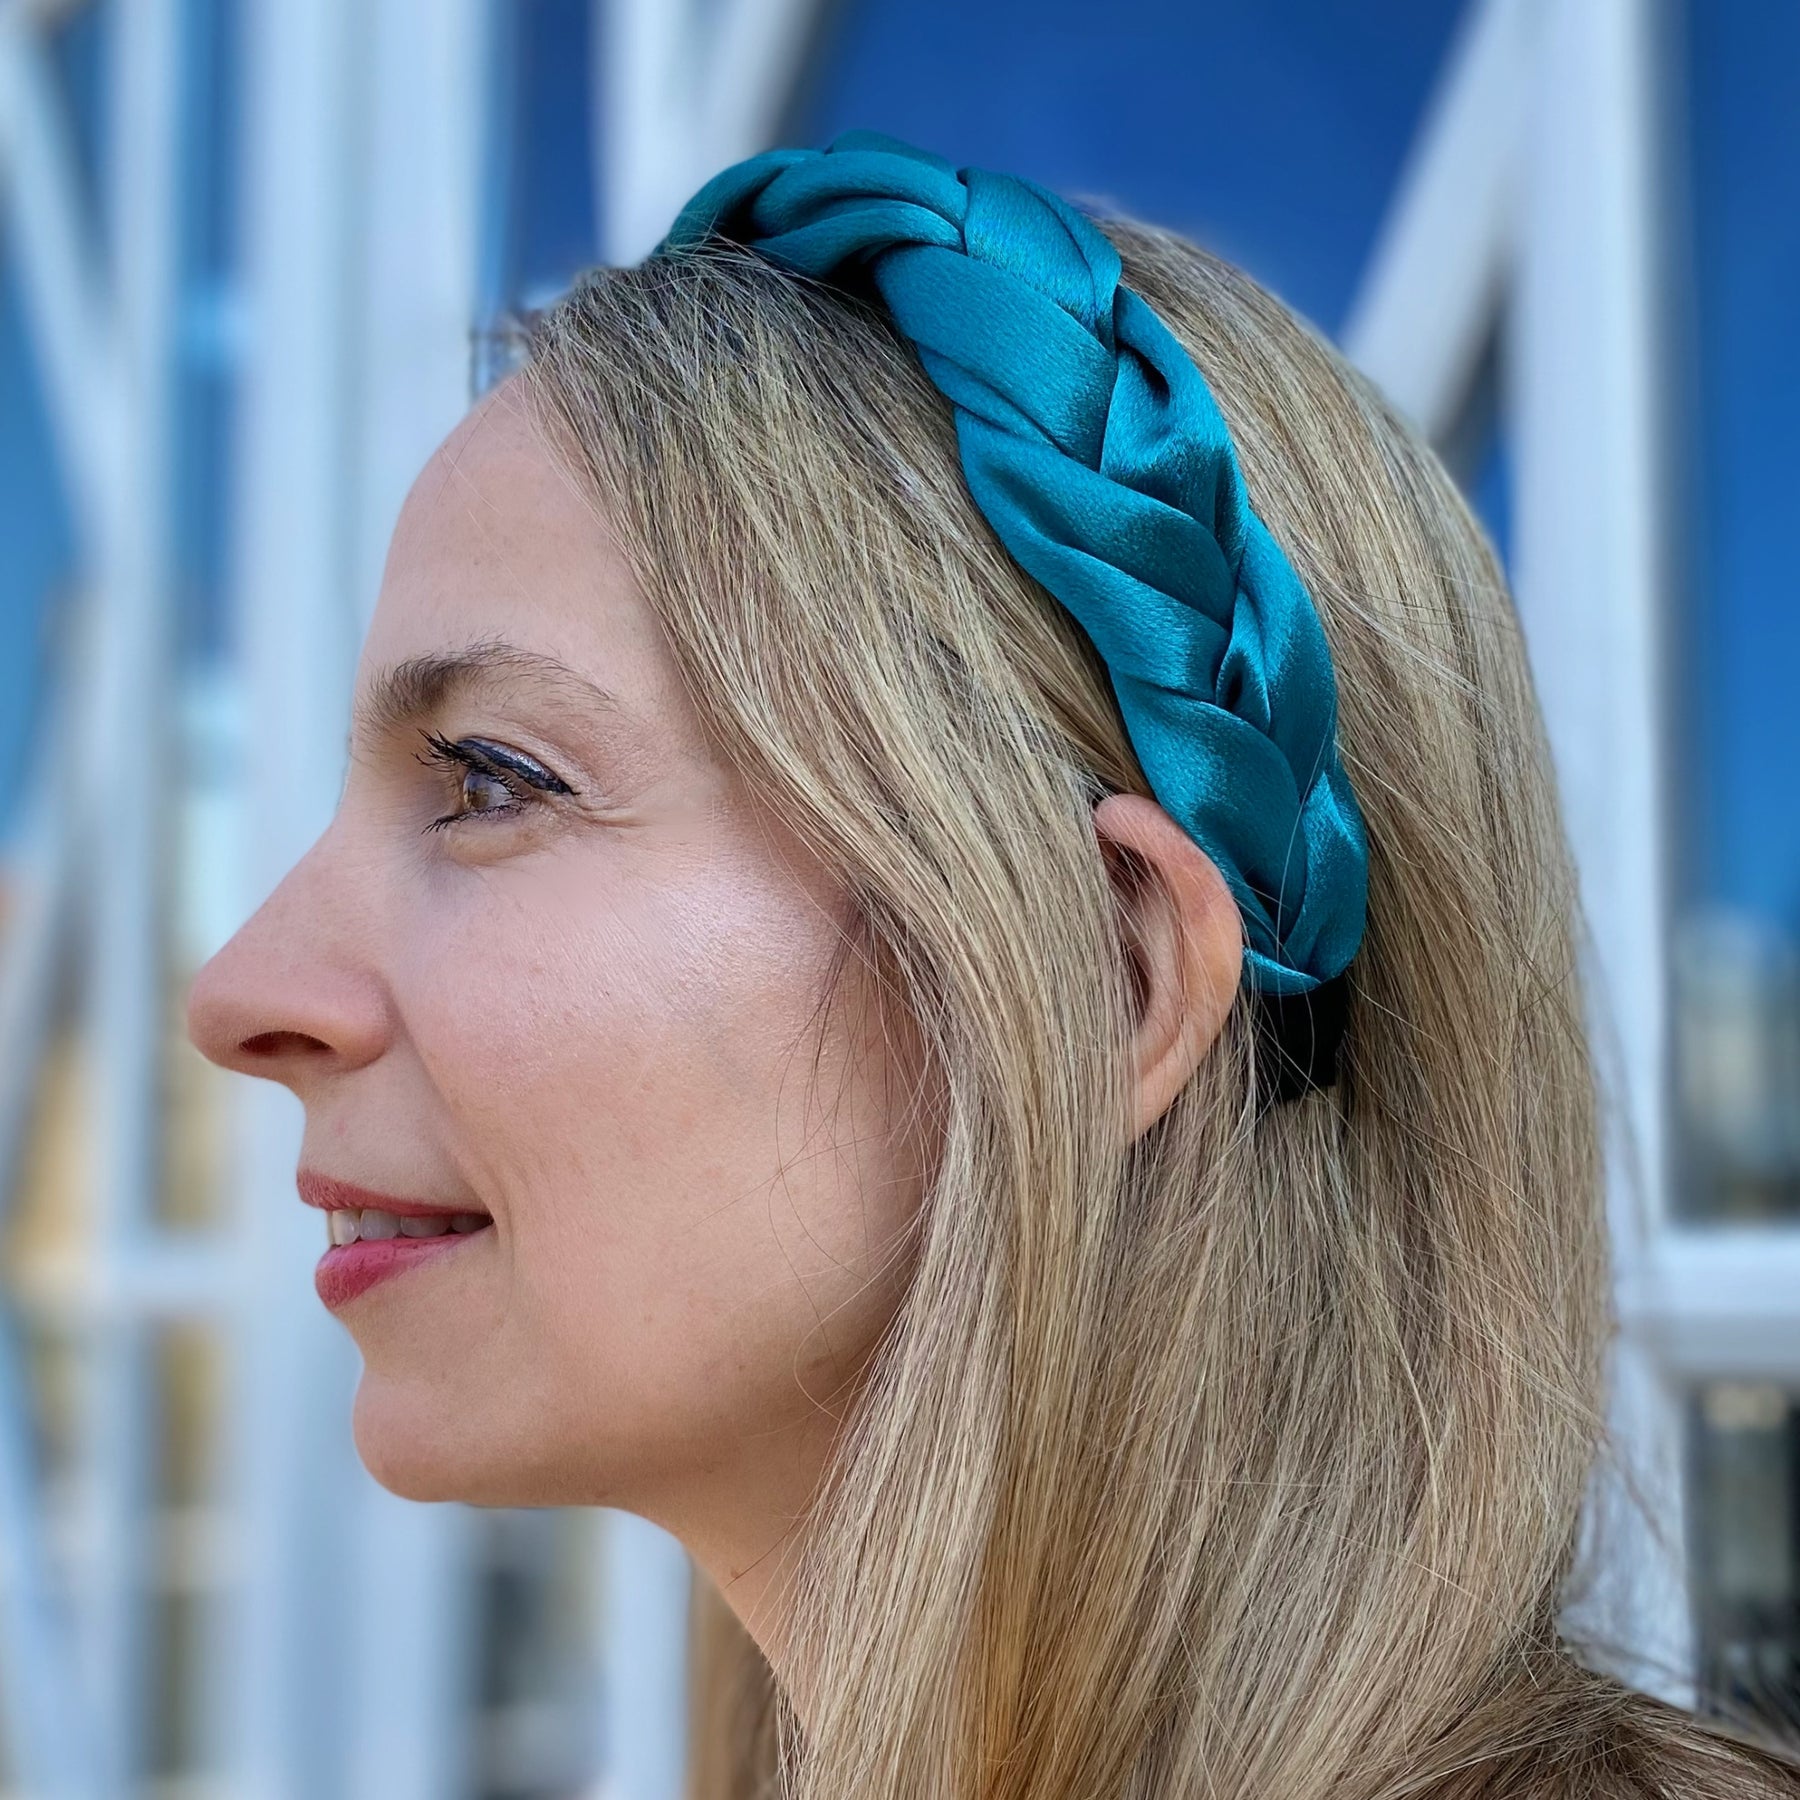 QueenMee – Turquoise Headband Braided Accessories